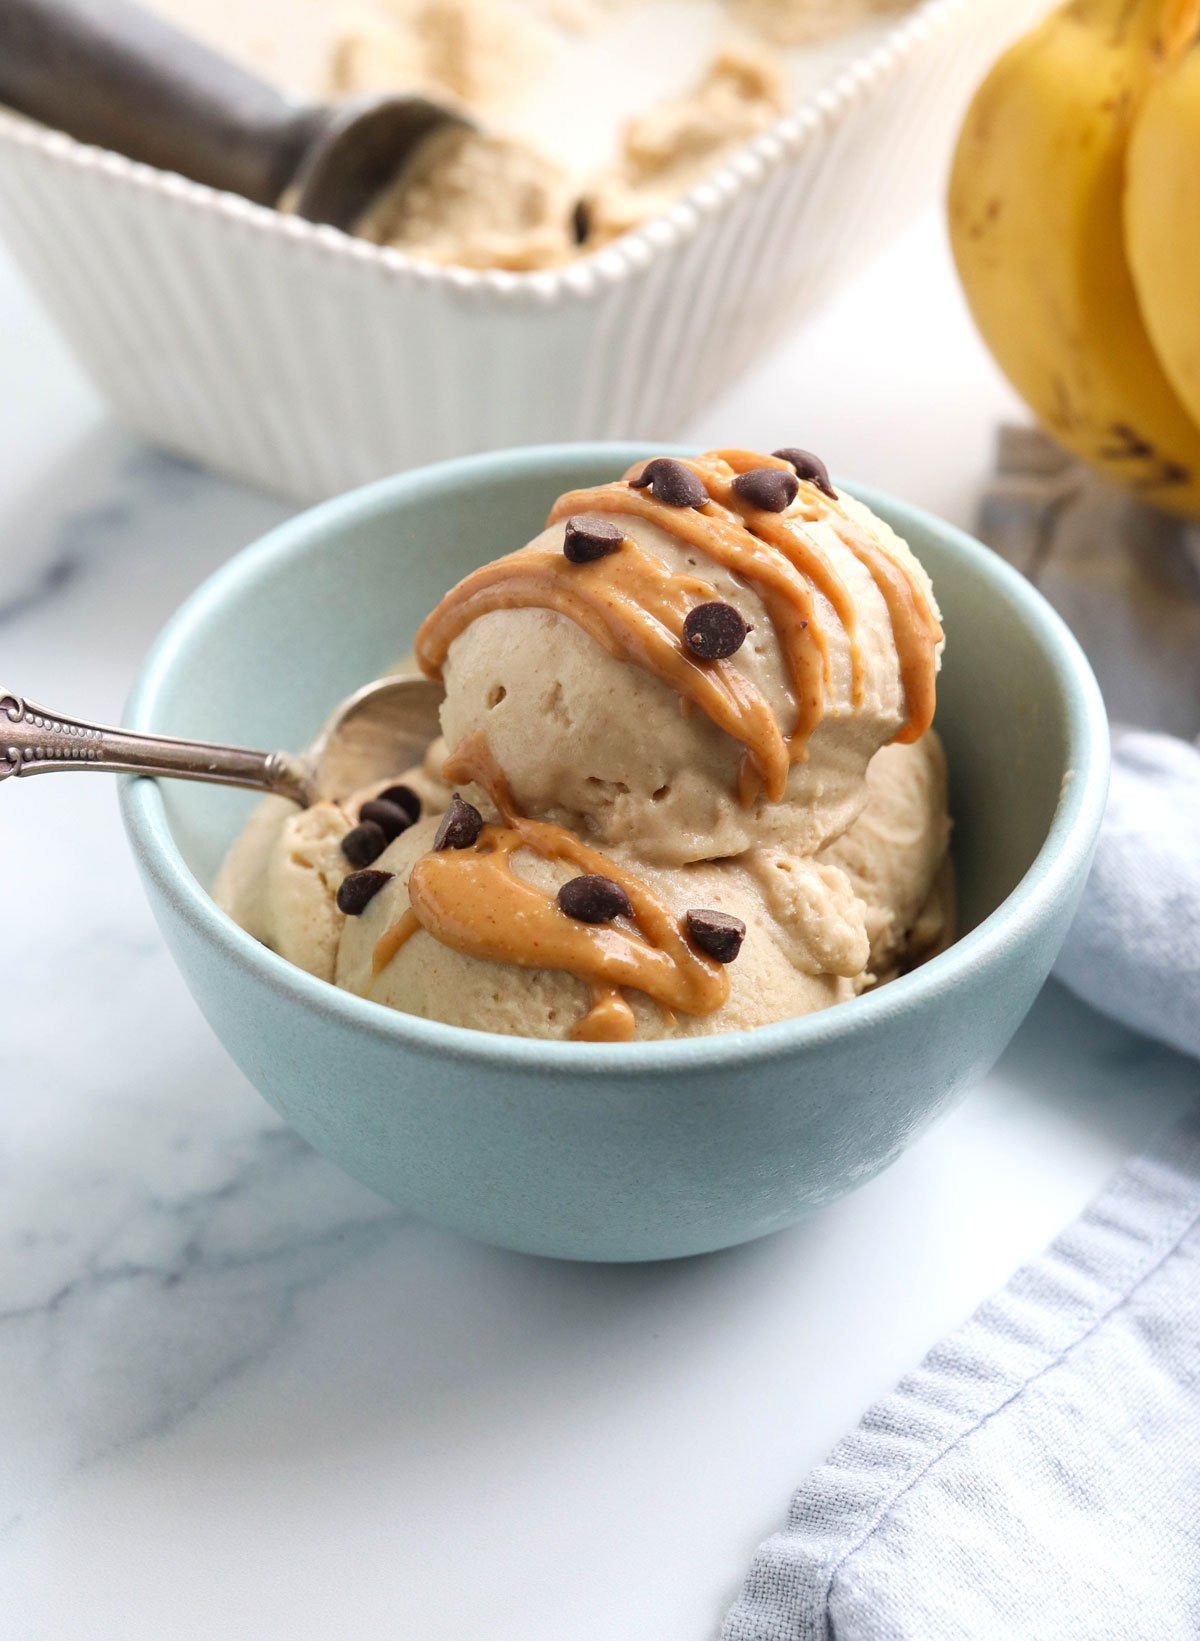 banana ice cream with chocolate chips on top